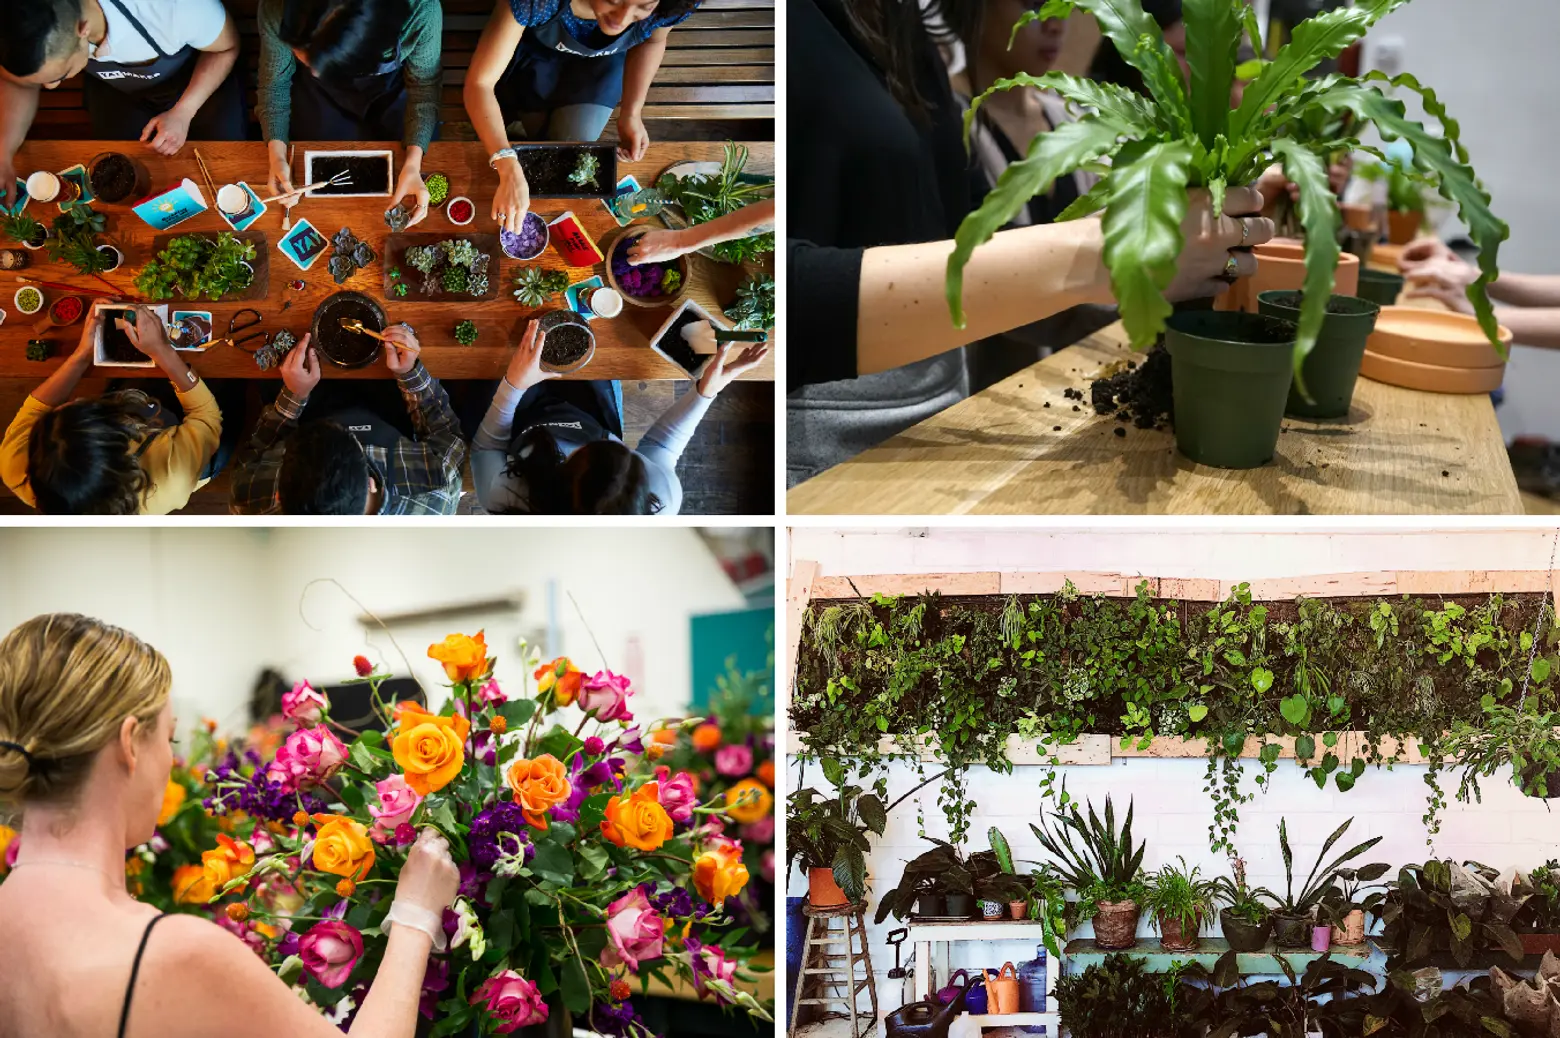 The 10 best spots for plant classes in NYC